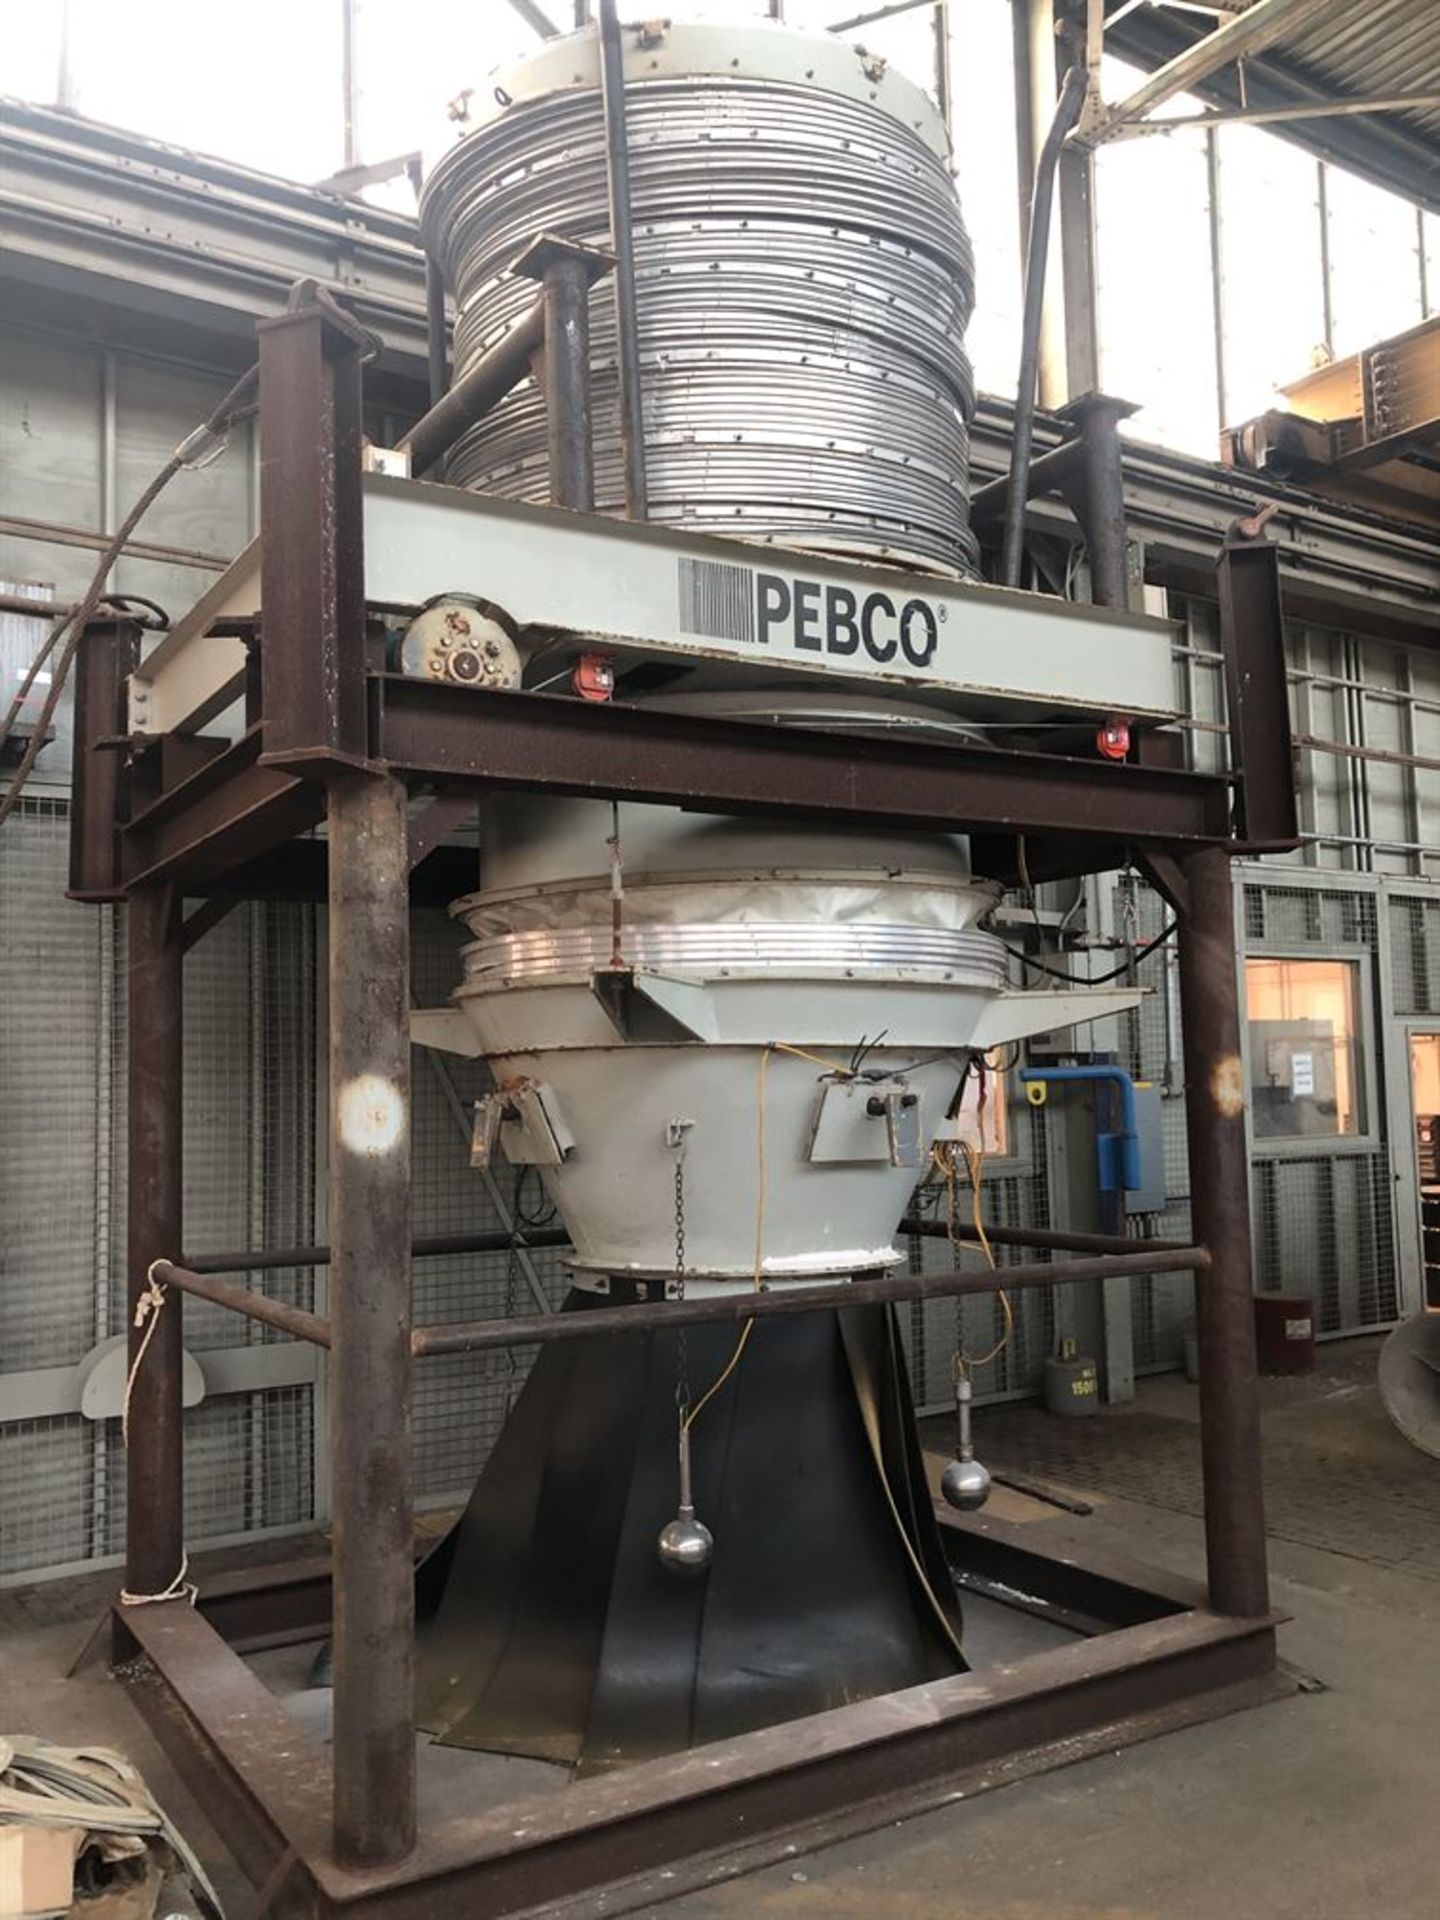 Pebco Material Loader System (Location: Learning Center) - Image 6 of 8